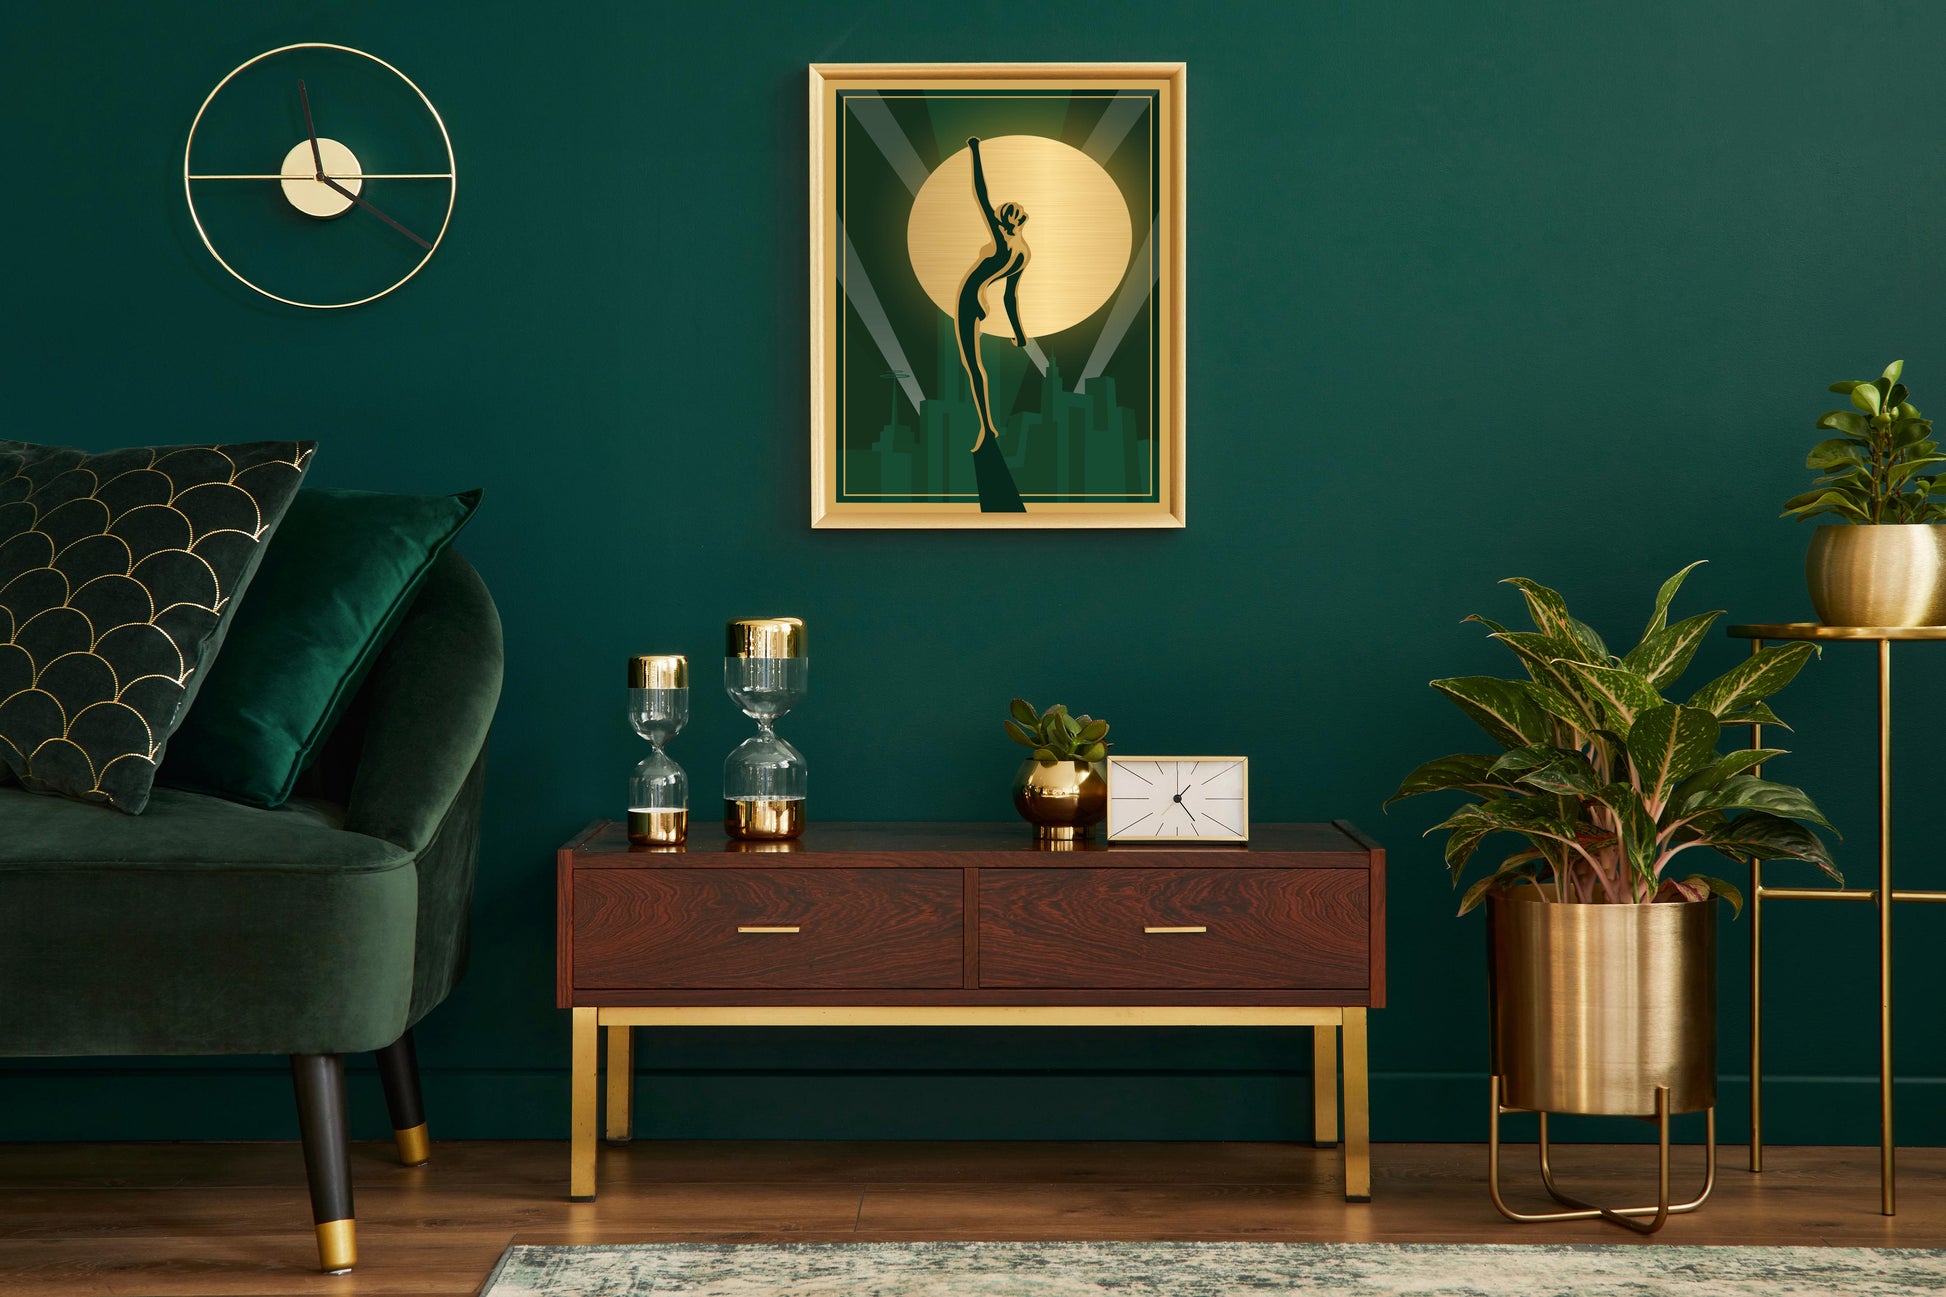 Art deco print in green and gold